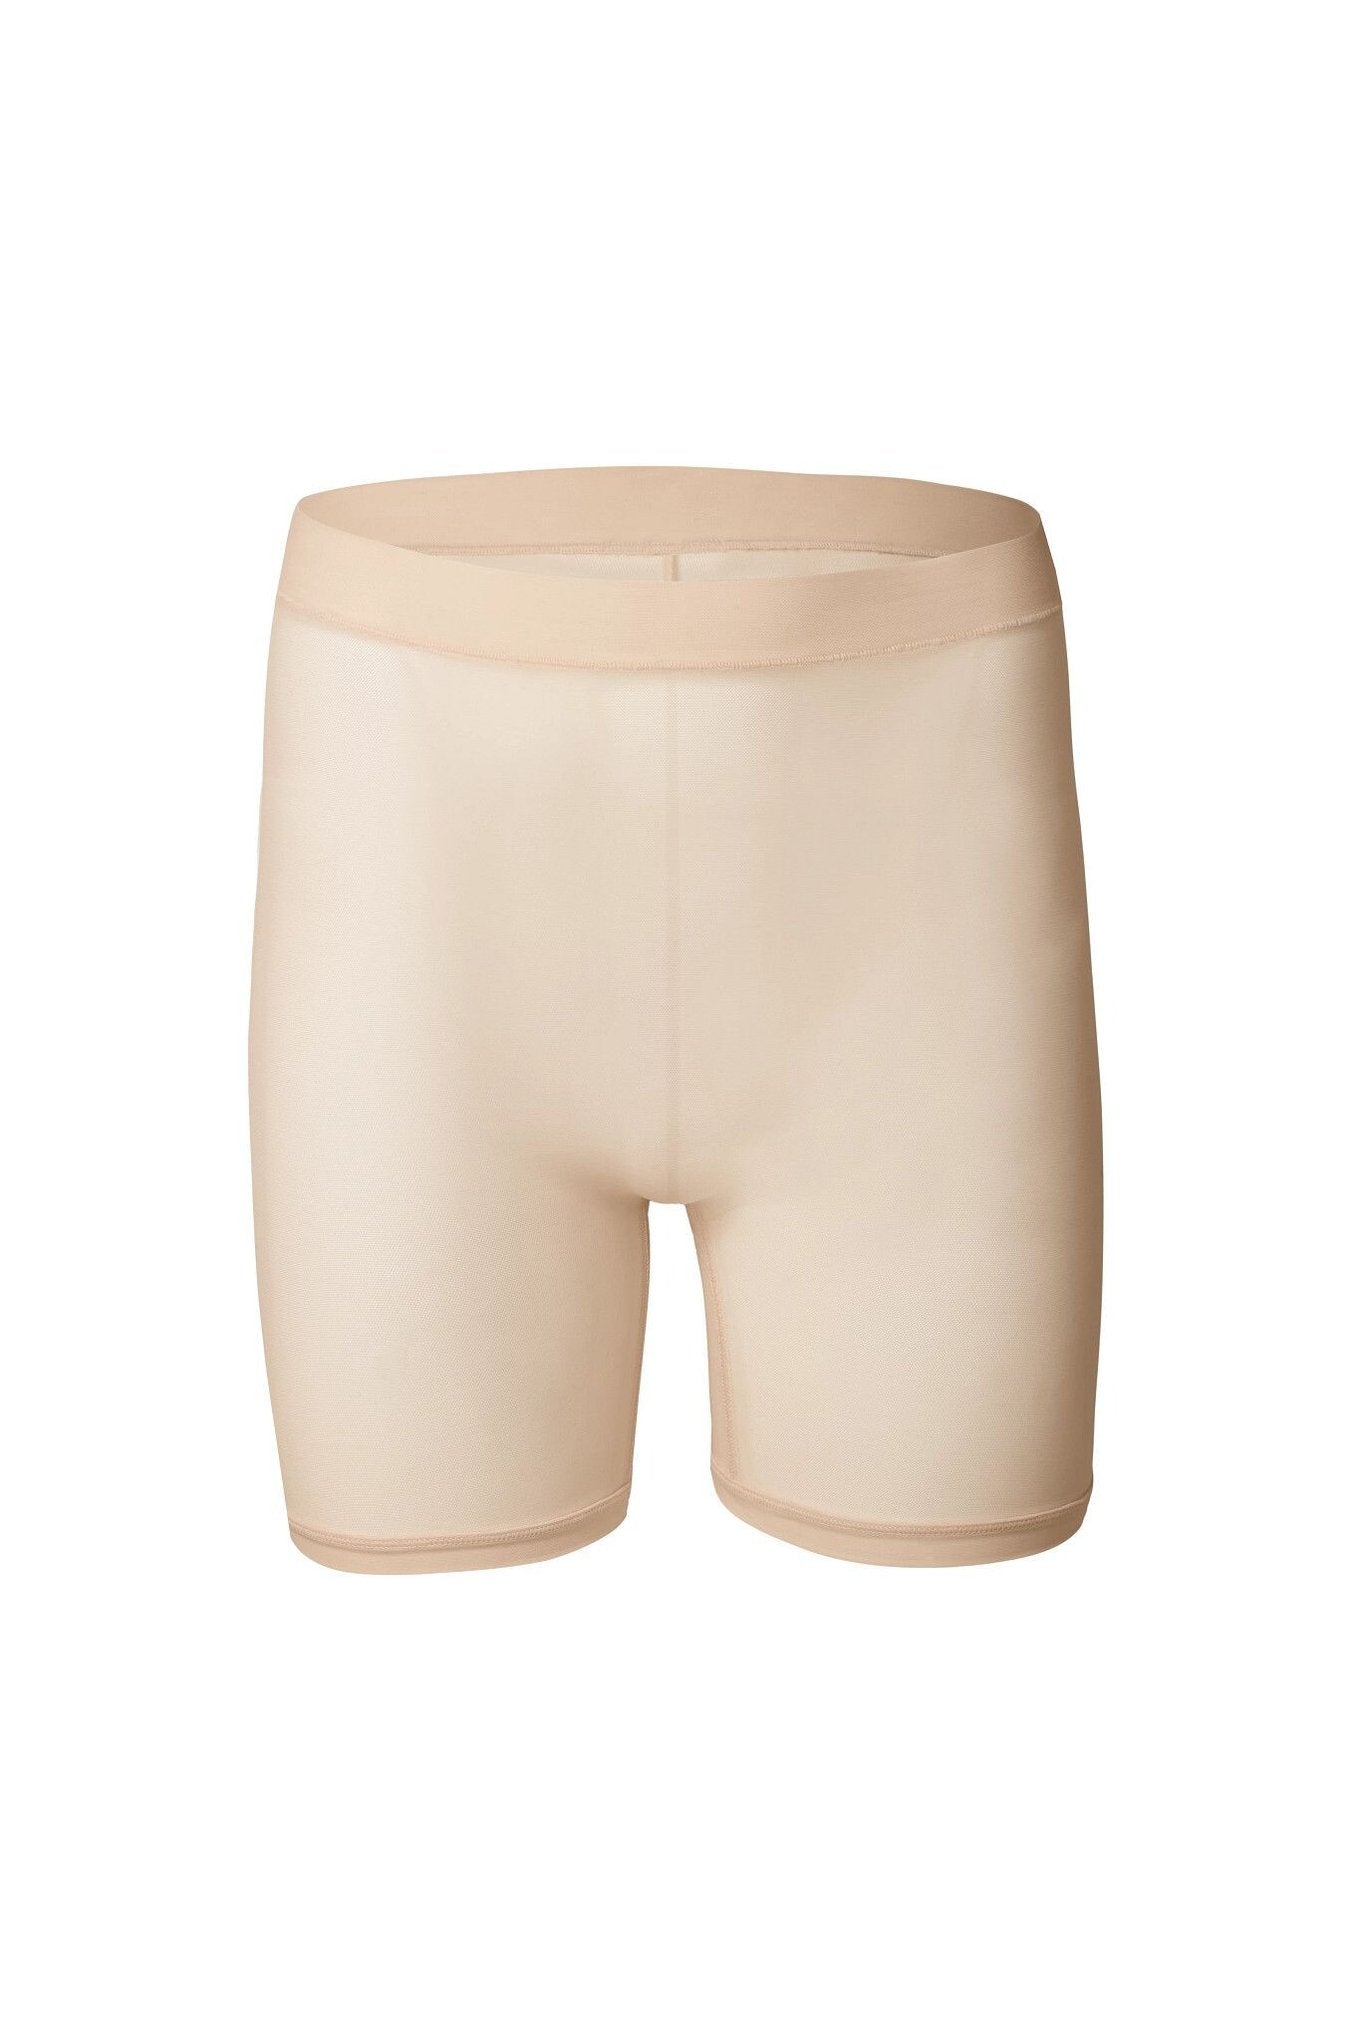 nueskin Dina Mesh High-Rise Shortie in color Appleblossom and shape shortie